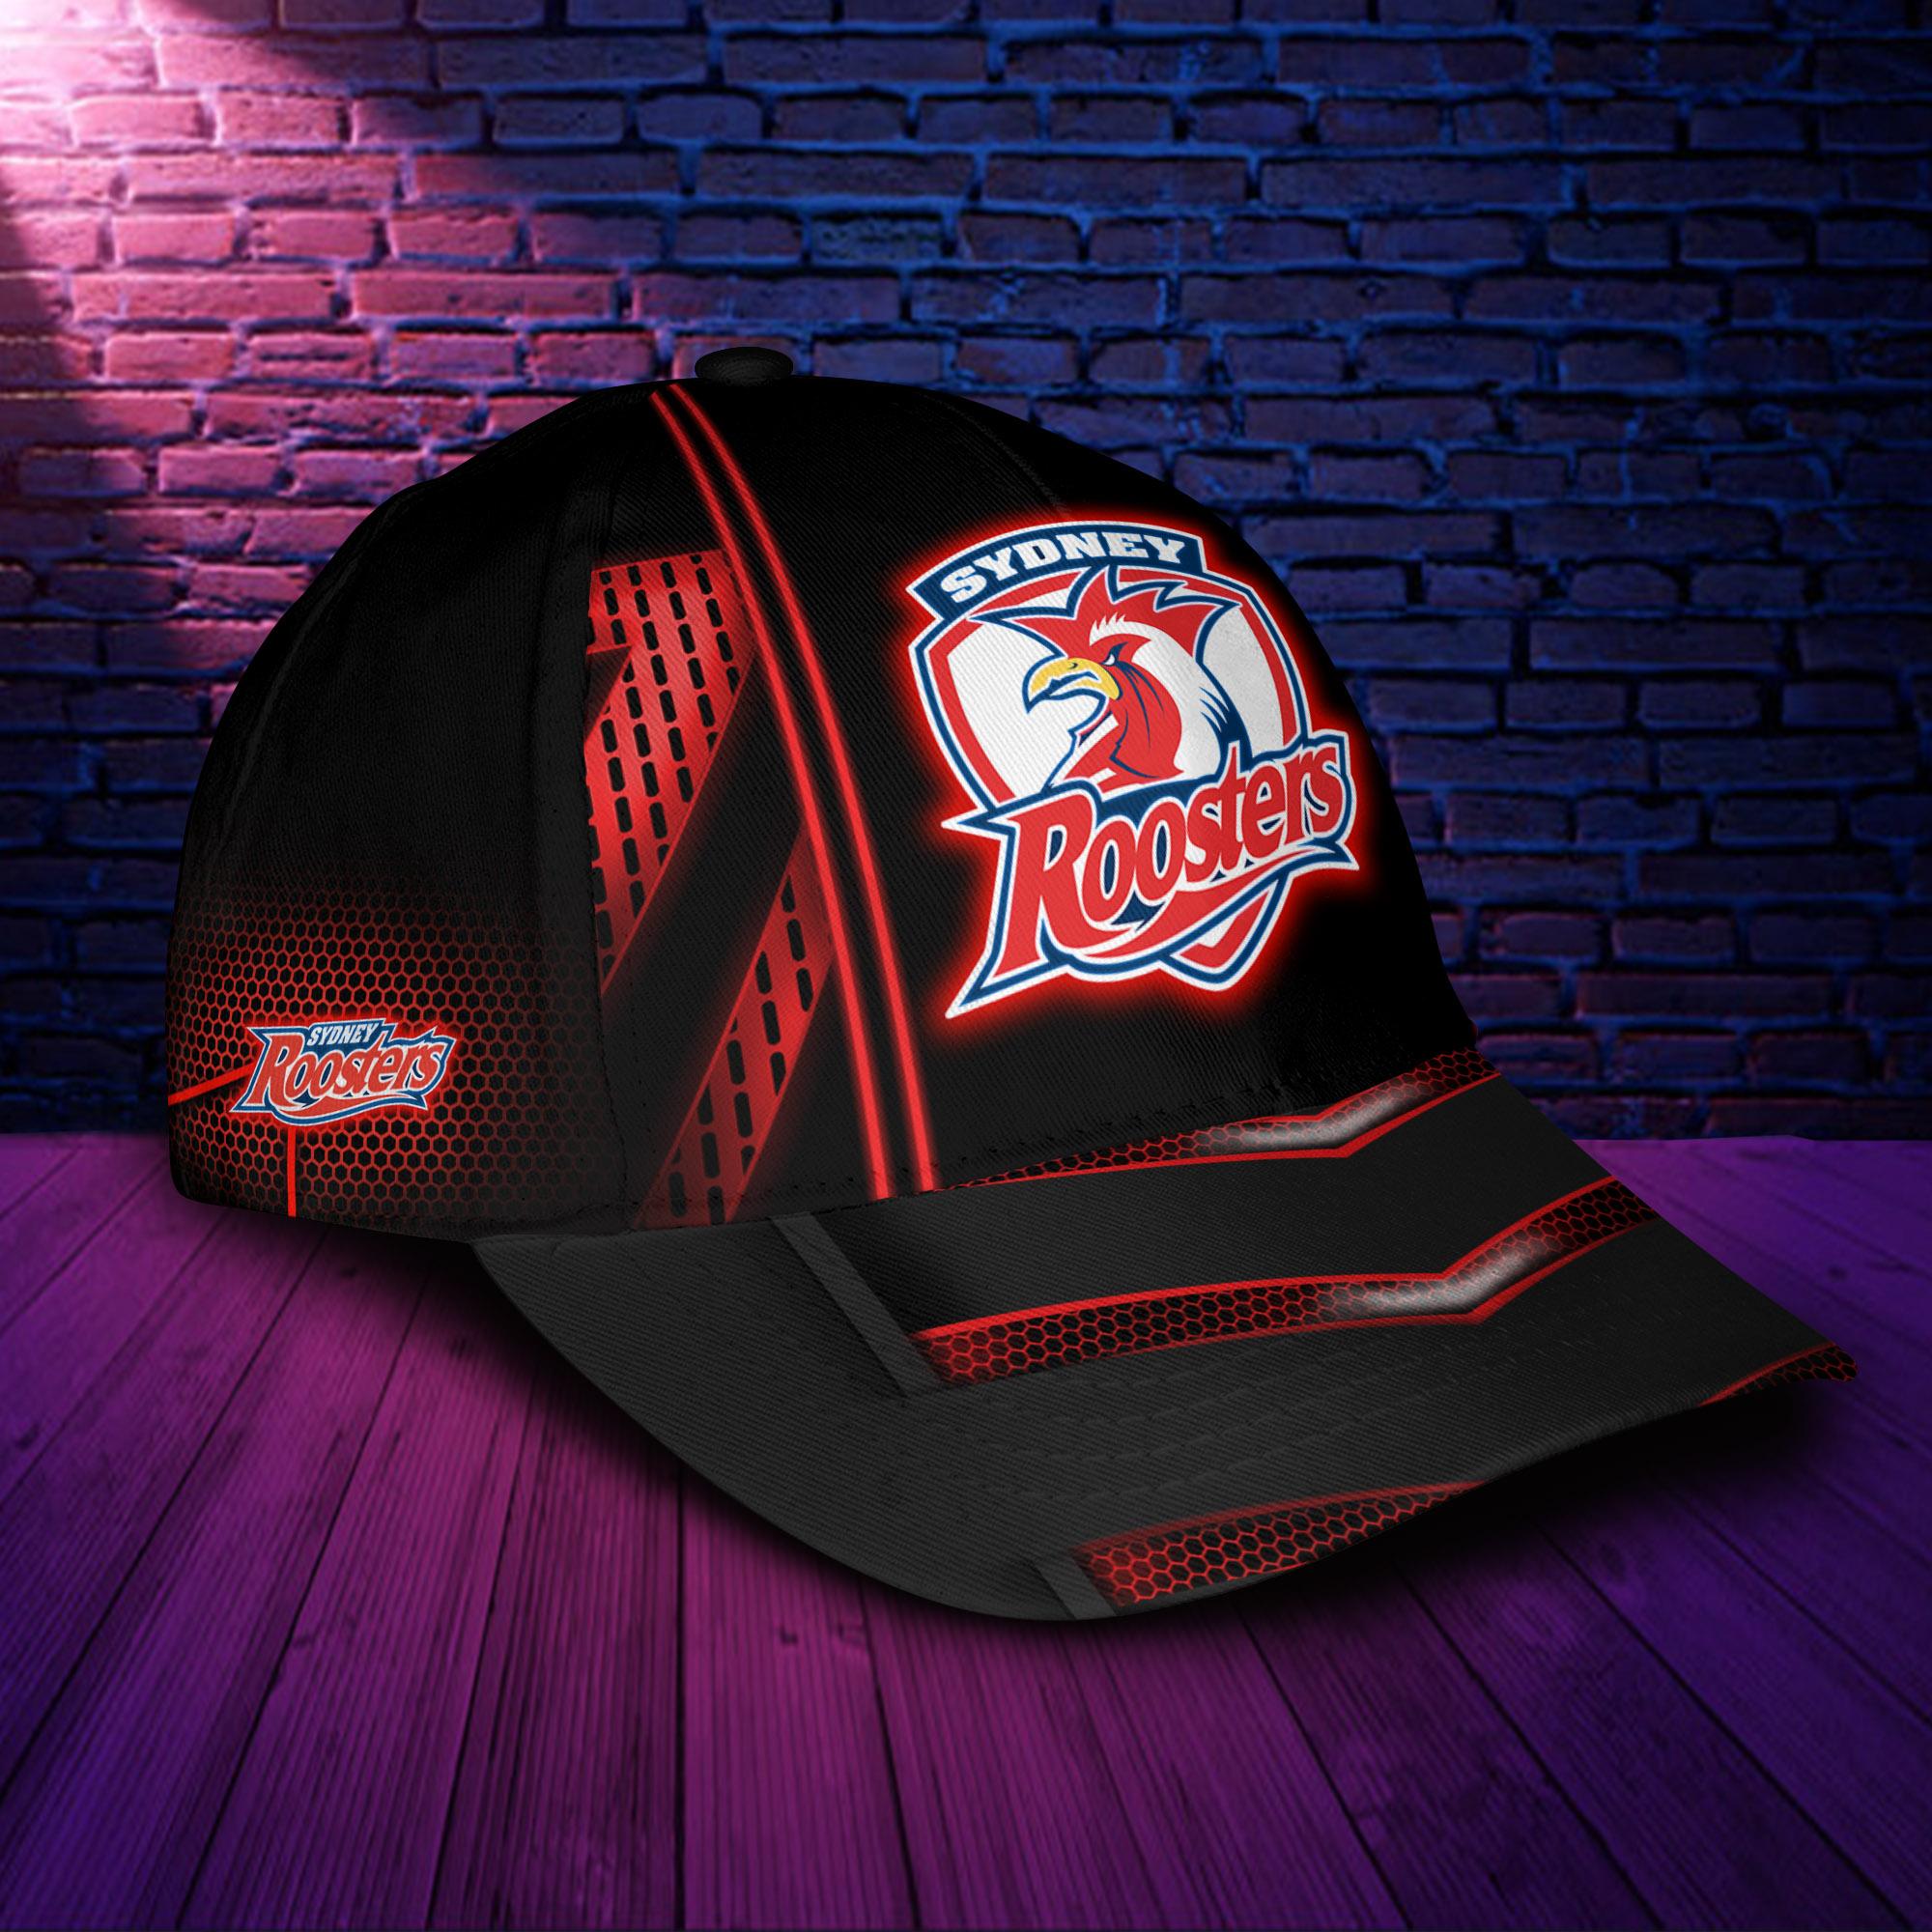 Sydney Roosters NRL 2022 Classic Cap